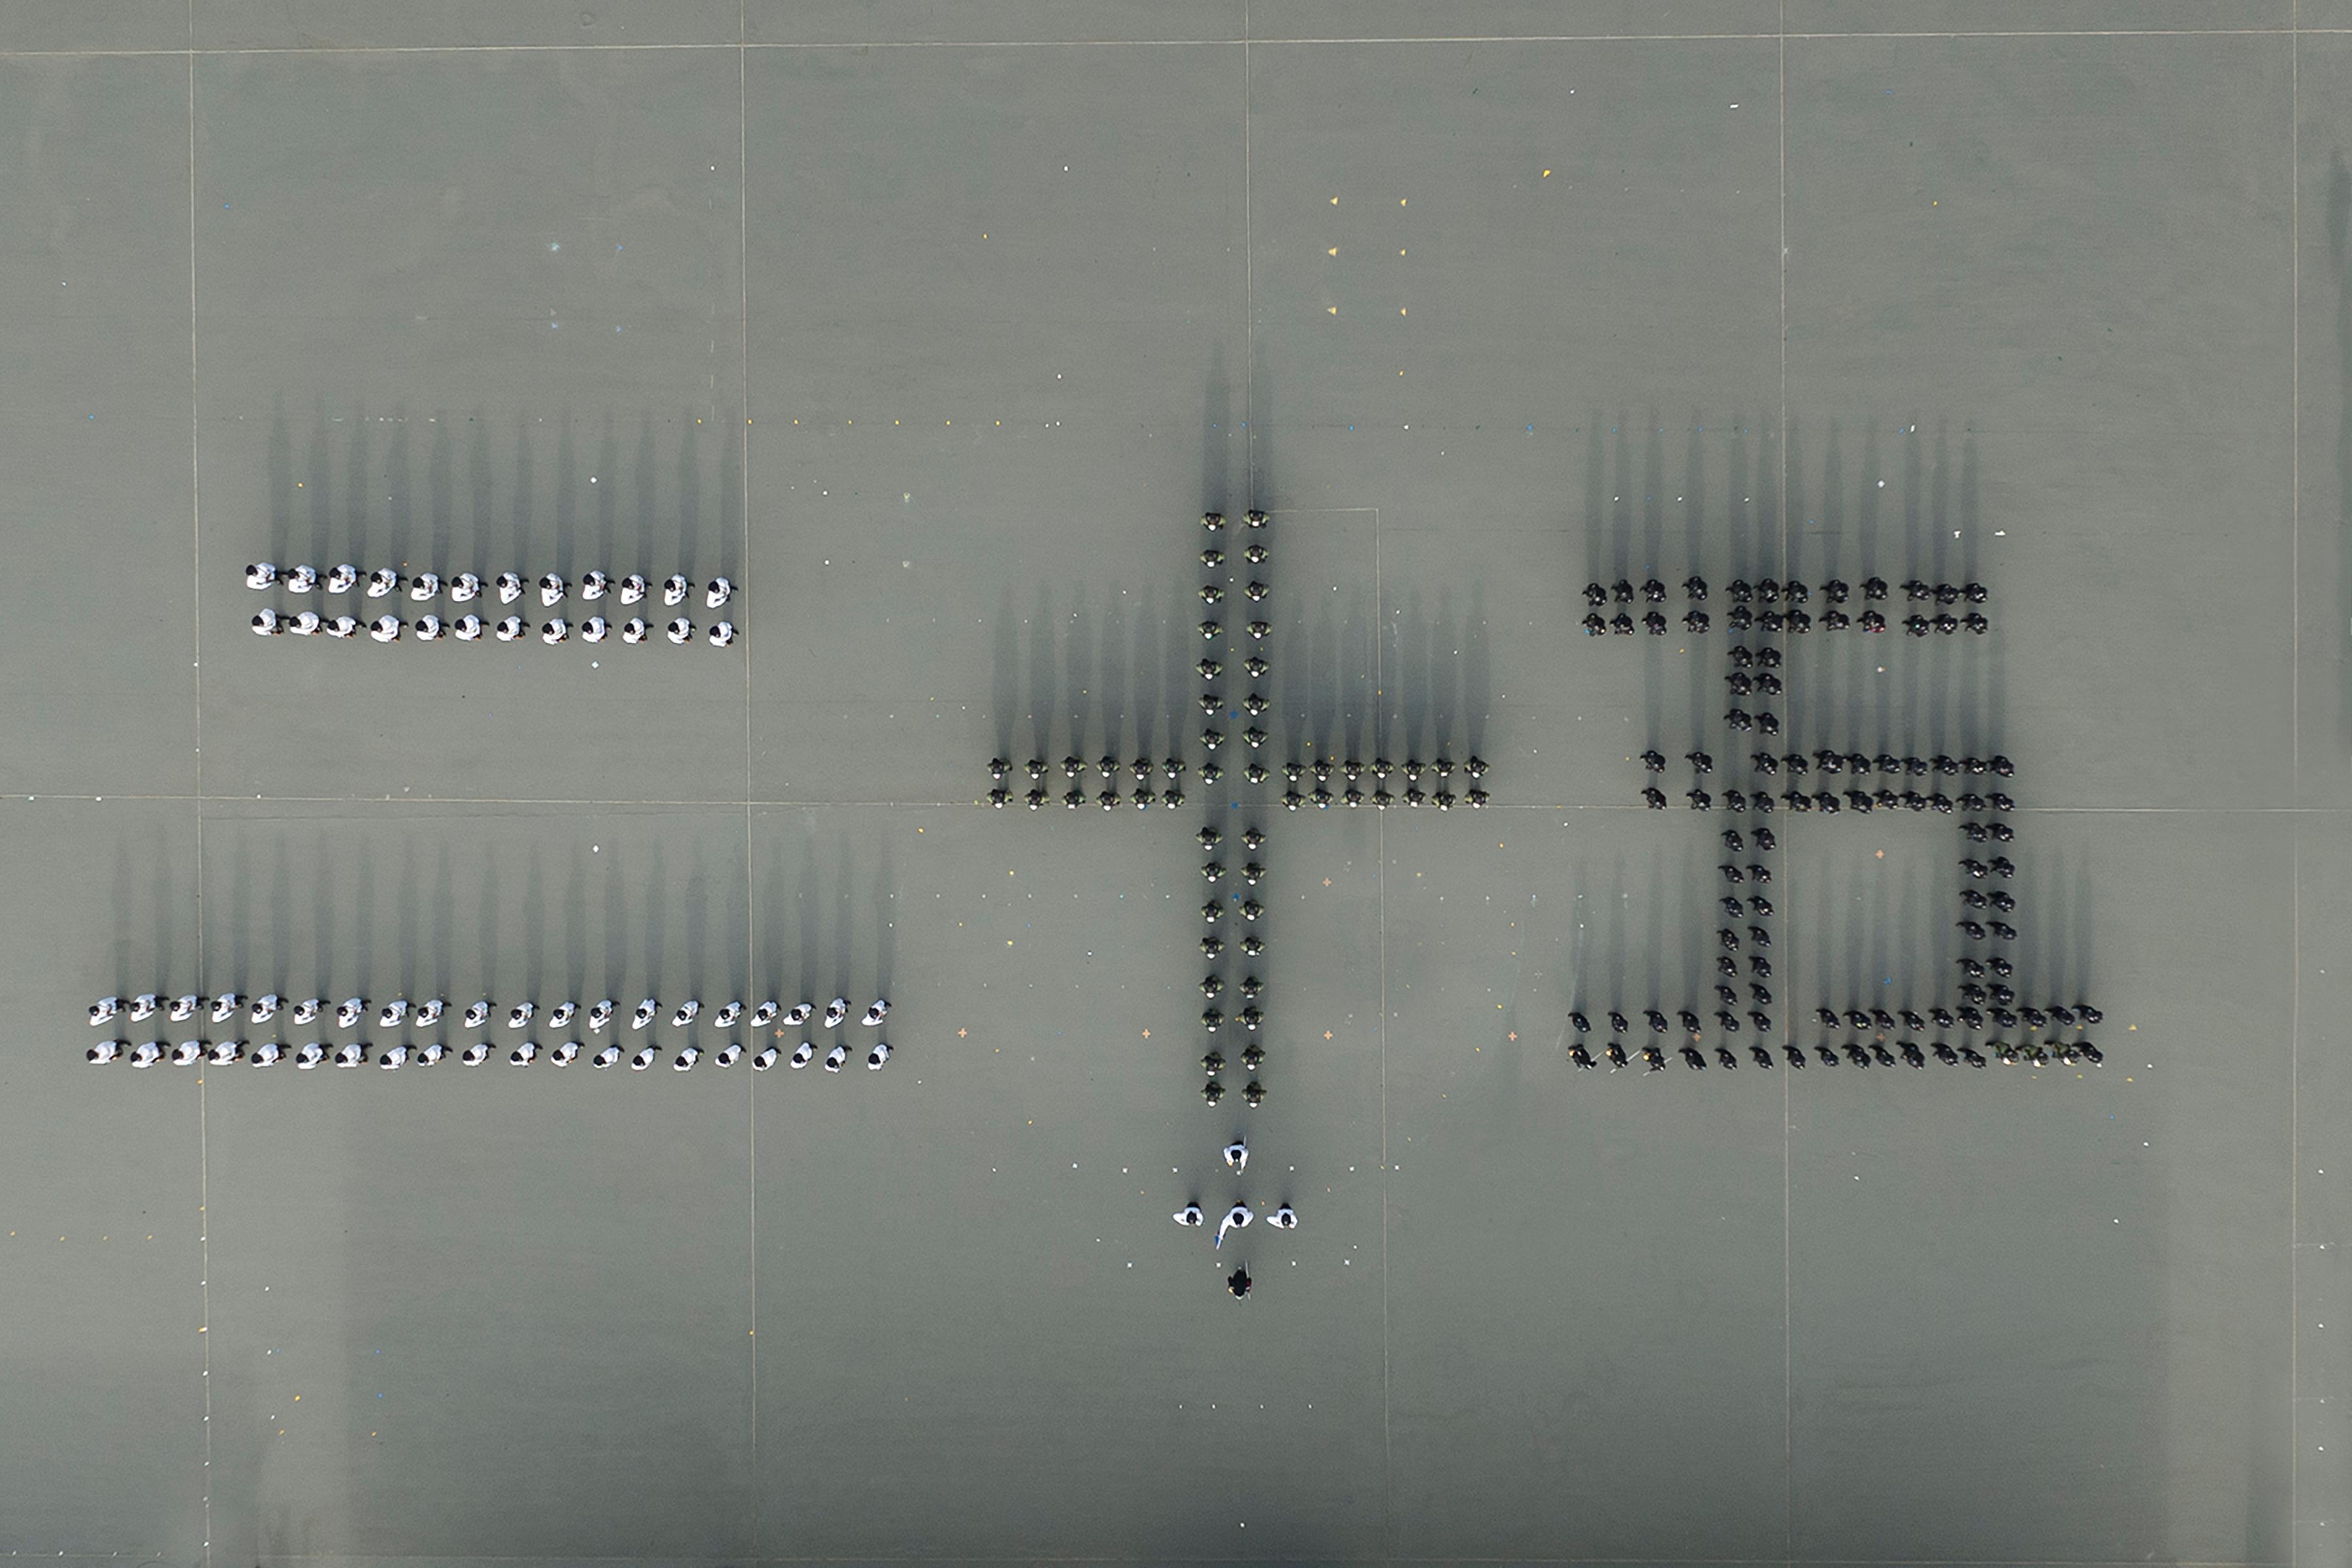 Photo shows the parade lining up to form the Chinese numerals “25” during the Chinese-style footdrill performance to celebrate the 25th anniversary of the establishment of the Hong Kong Special Administrative Region.